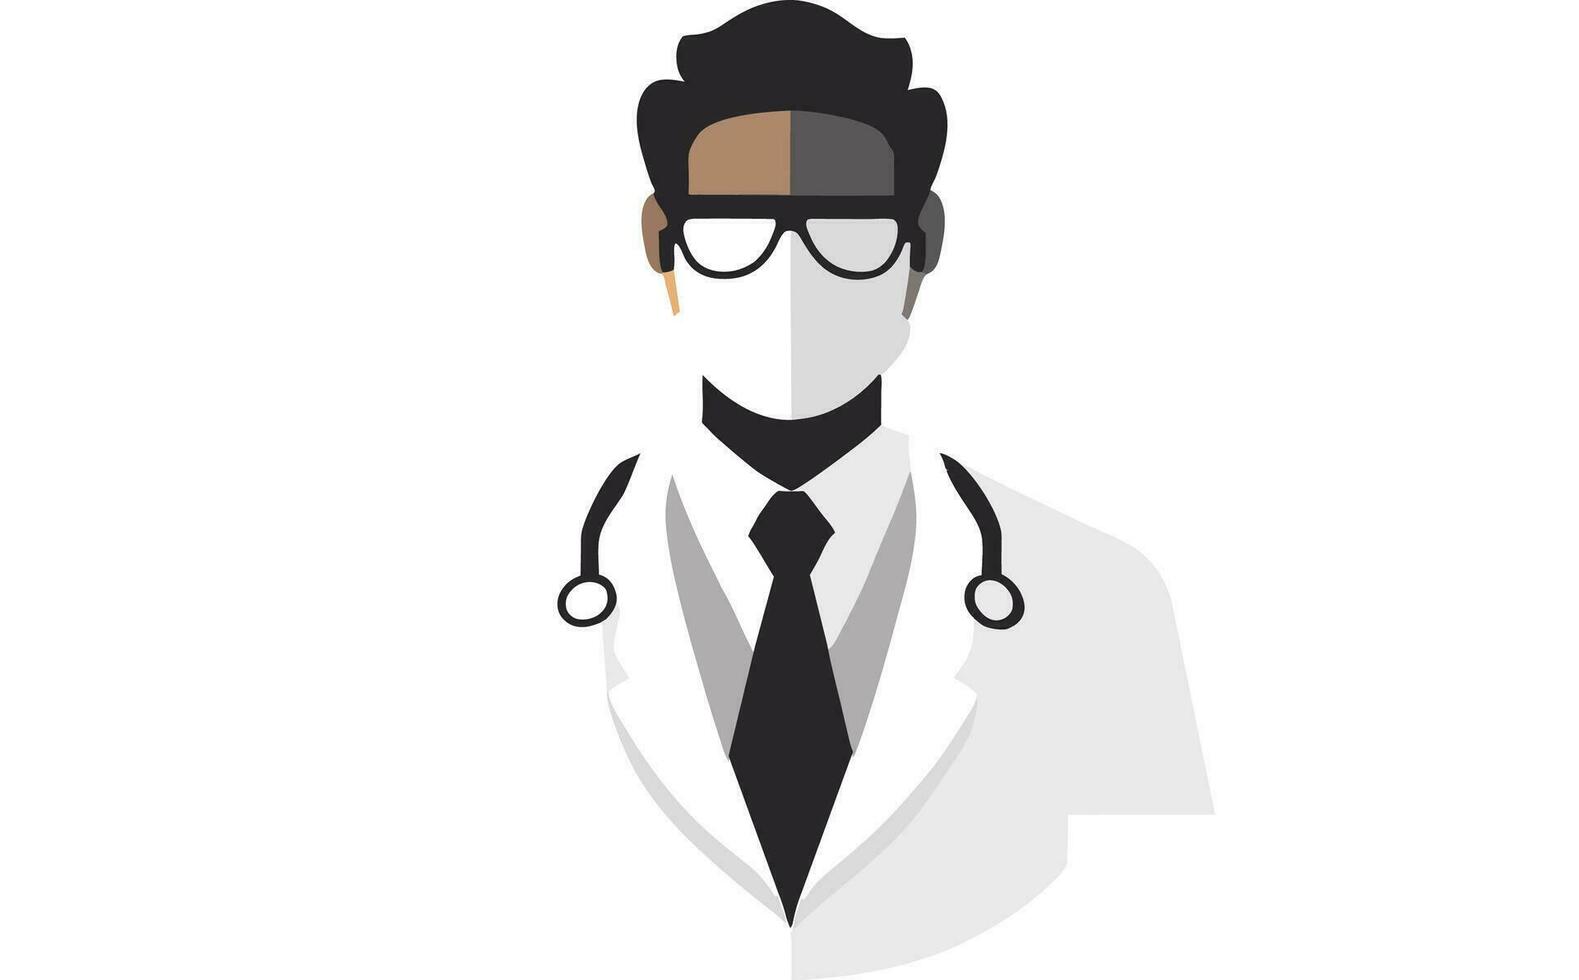 https://static.vecteezy.com/system/resources/previews/026/181/687/non_2x/docter-silhouette-art-silhouette-of-man-doctor-vector.jpg